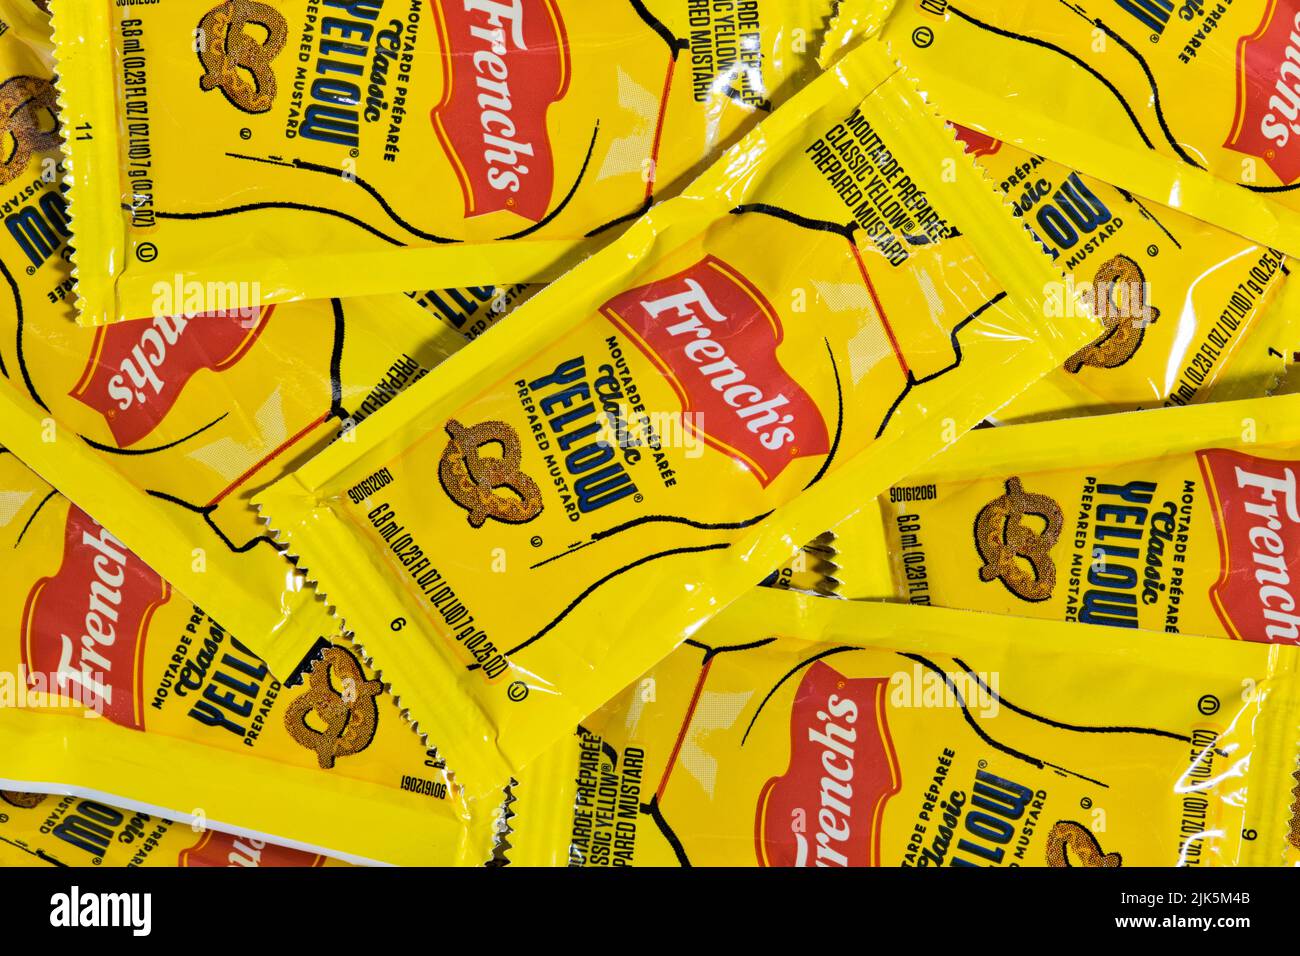 Houston, Texas USA 07-14-2022: French's Yellow Mustard sachets scattered loosely showing brand name and logo. American condiment owned by McCormick. Stock Photo